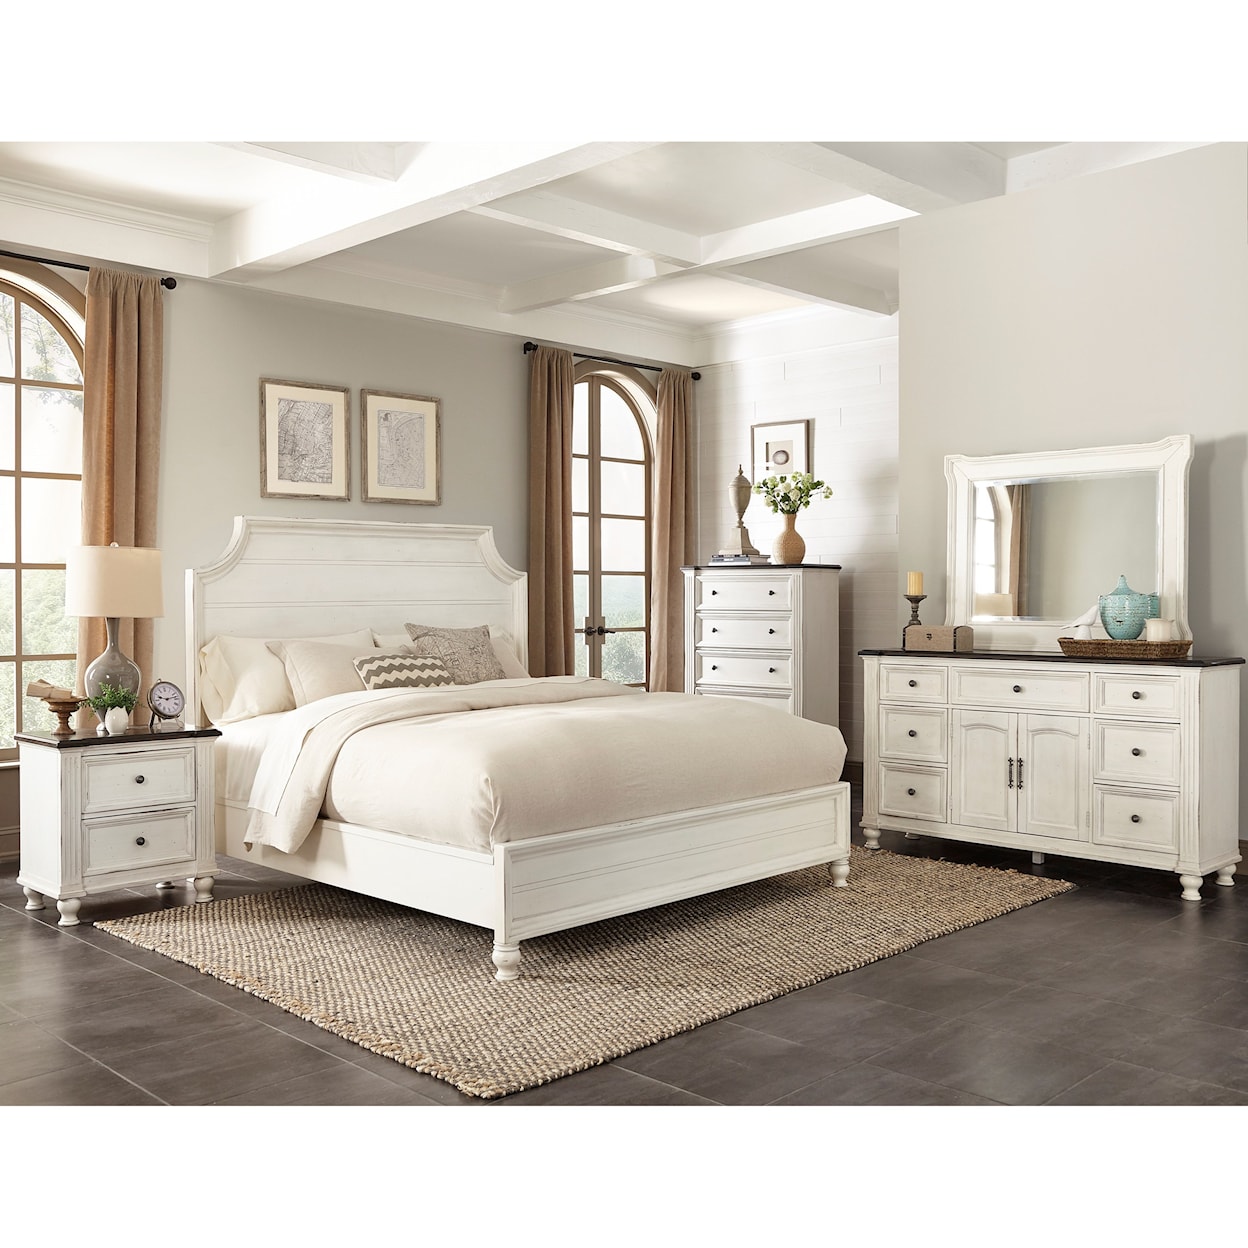 Sunny Designs Carriage House Queen Bedroom Group